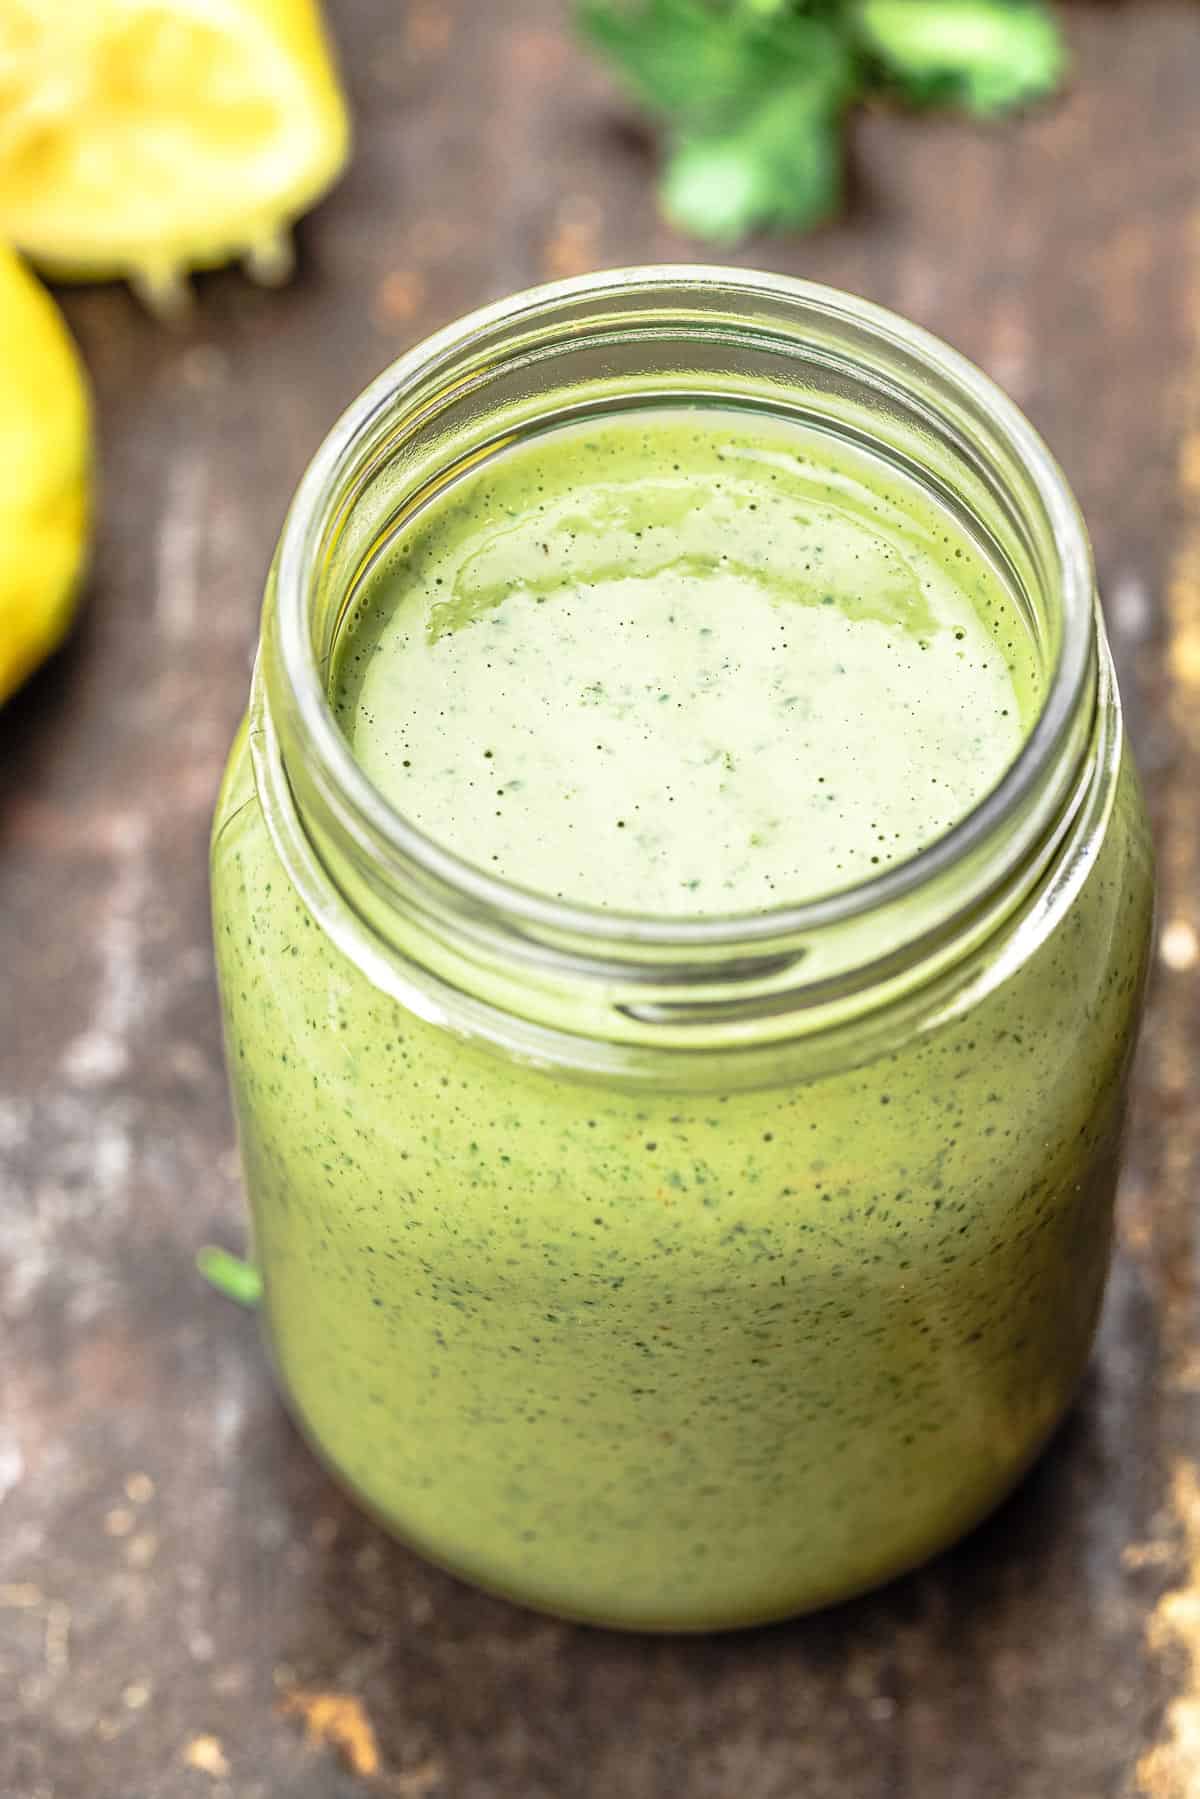 Best Green Goddess Dressing to Buy, According to Our Taste Test